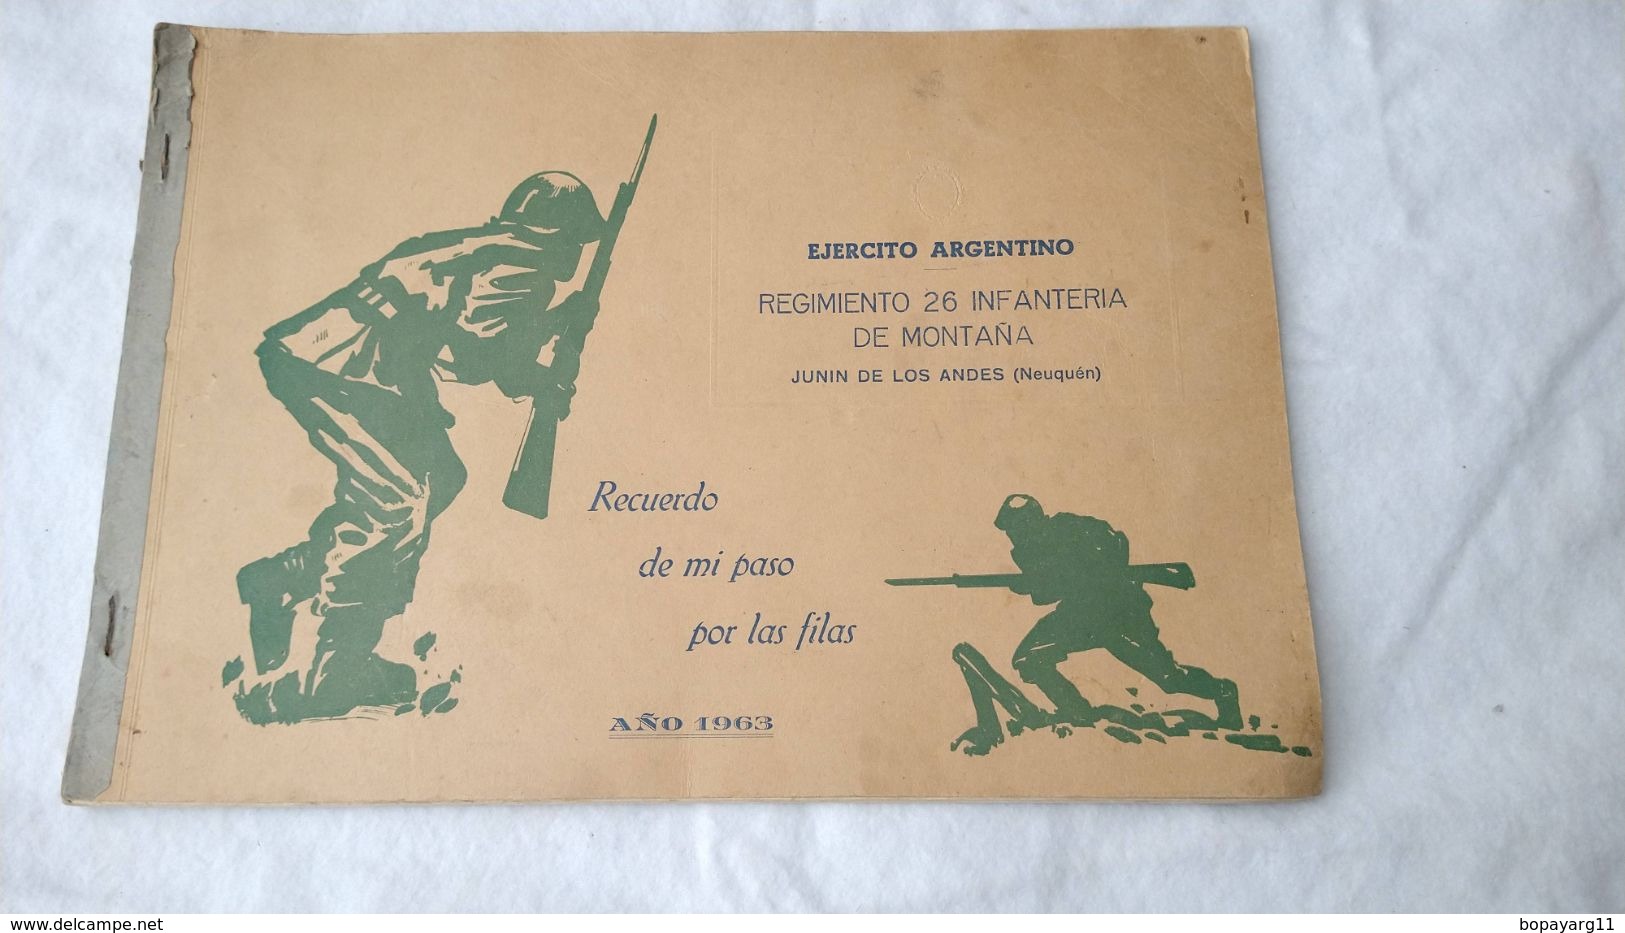 Argentine Army Promotion Photo Book 1963 Military Life Mountain Troops 24 Pages #13 - Spanish